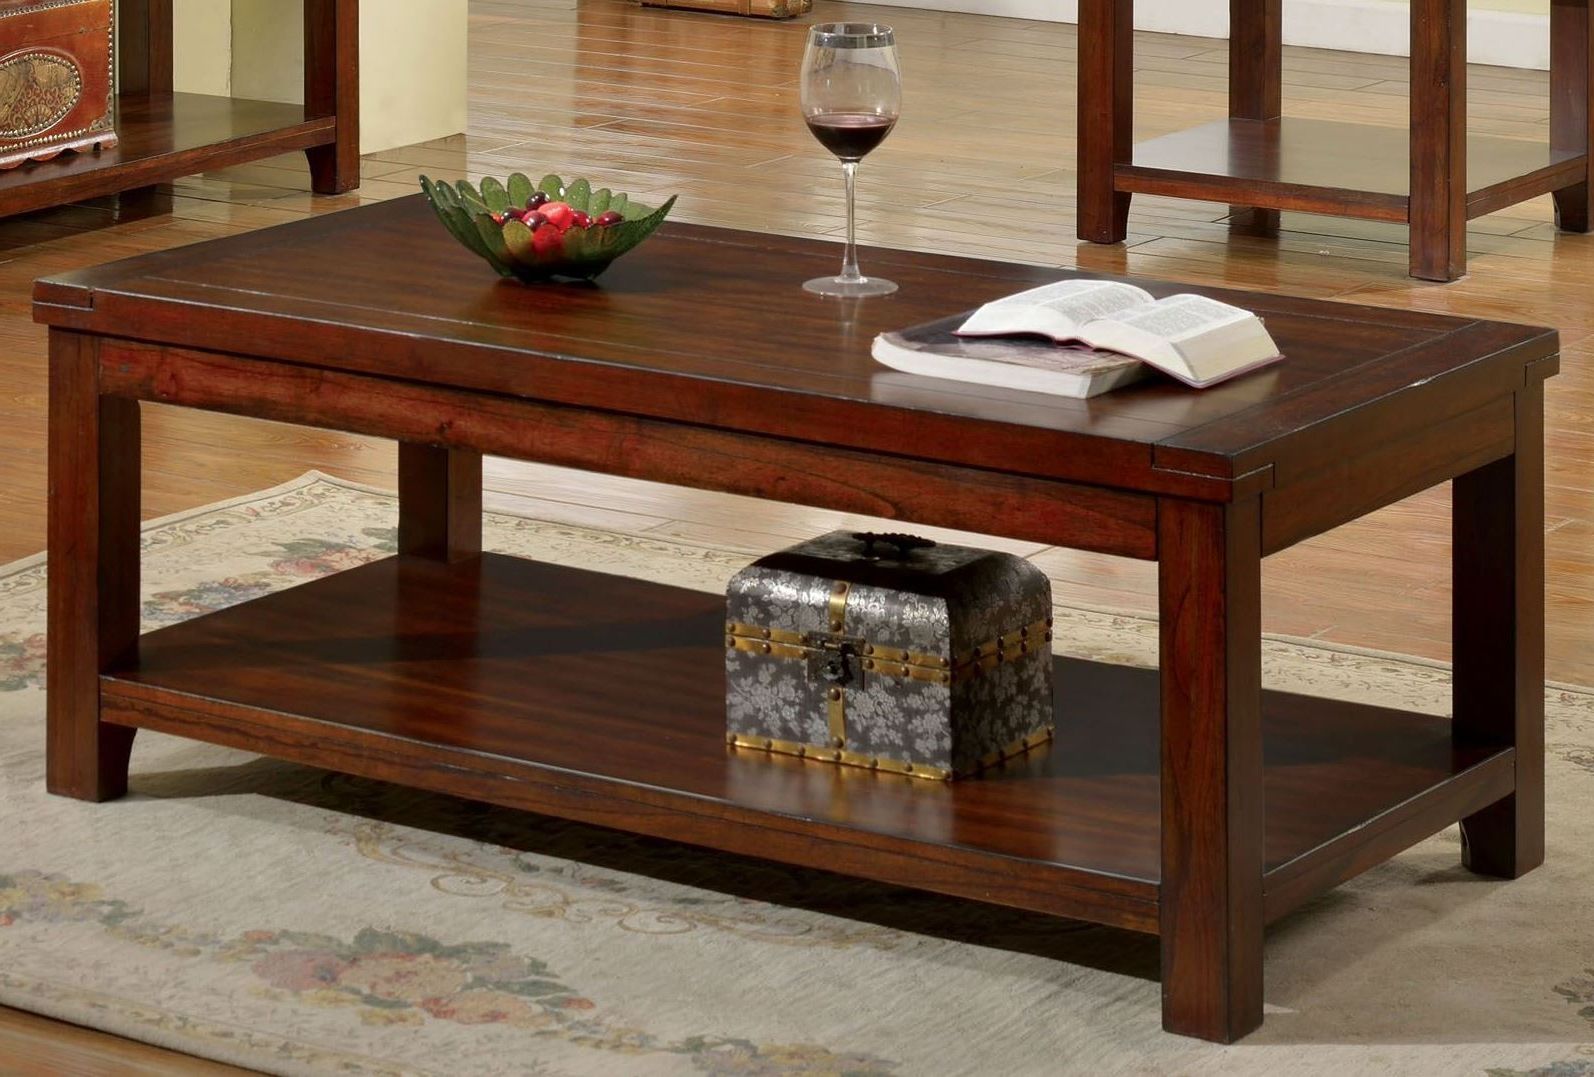 Most Current Heartwood Cherry Wood Coffee Tables Intended For Estell Cherry Coffee Table From Furniture Of America (Gallery 2 of 20)